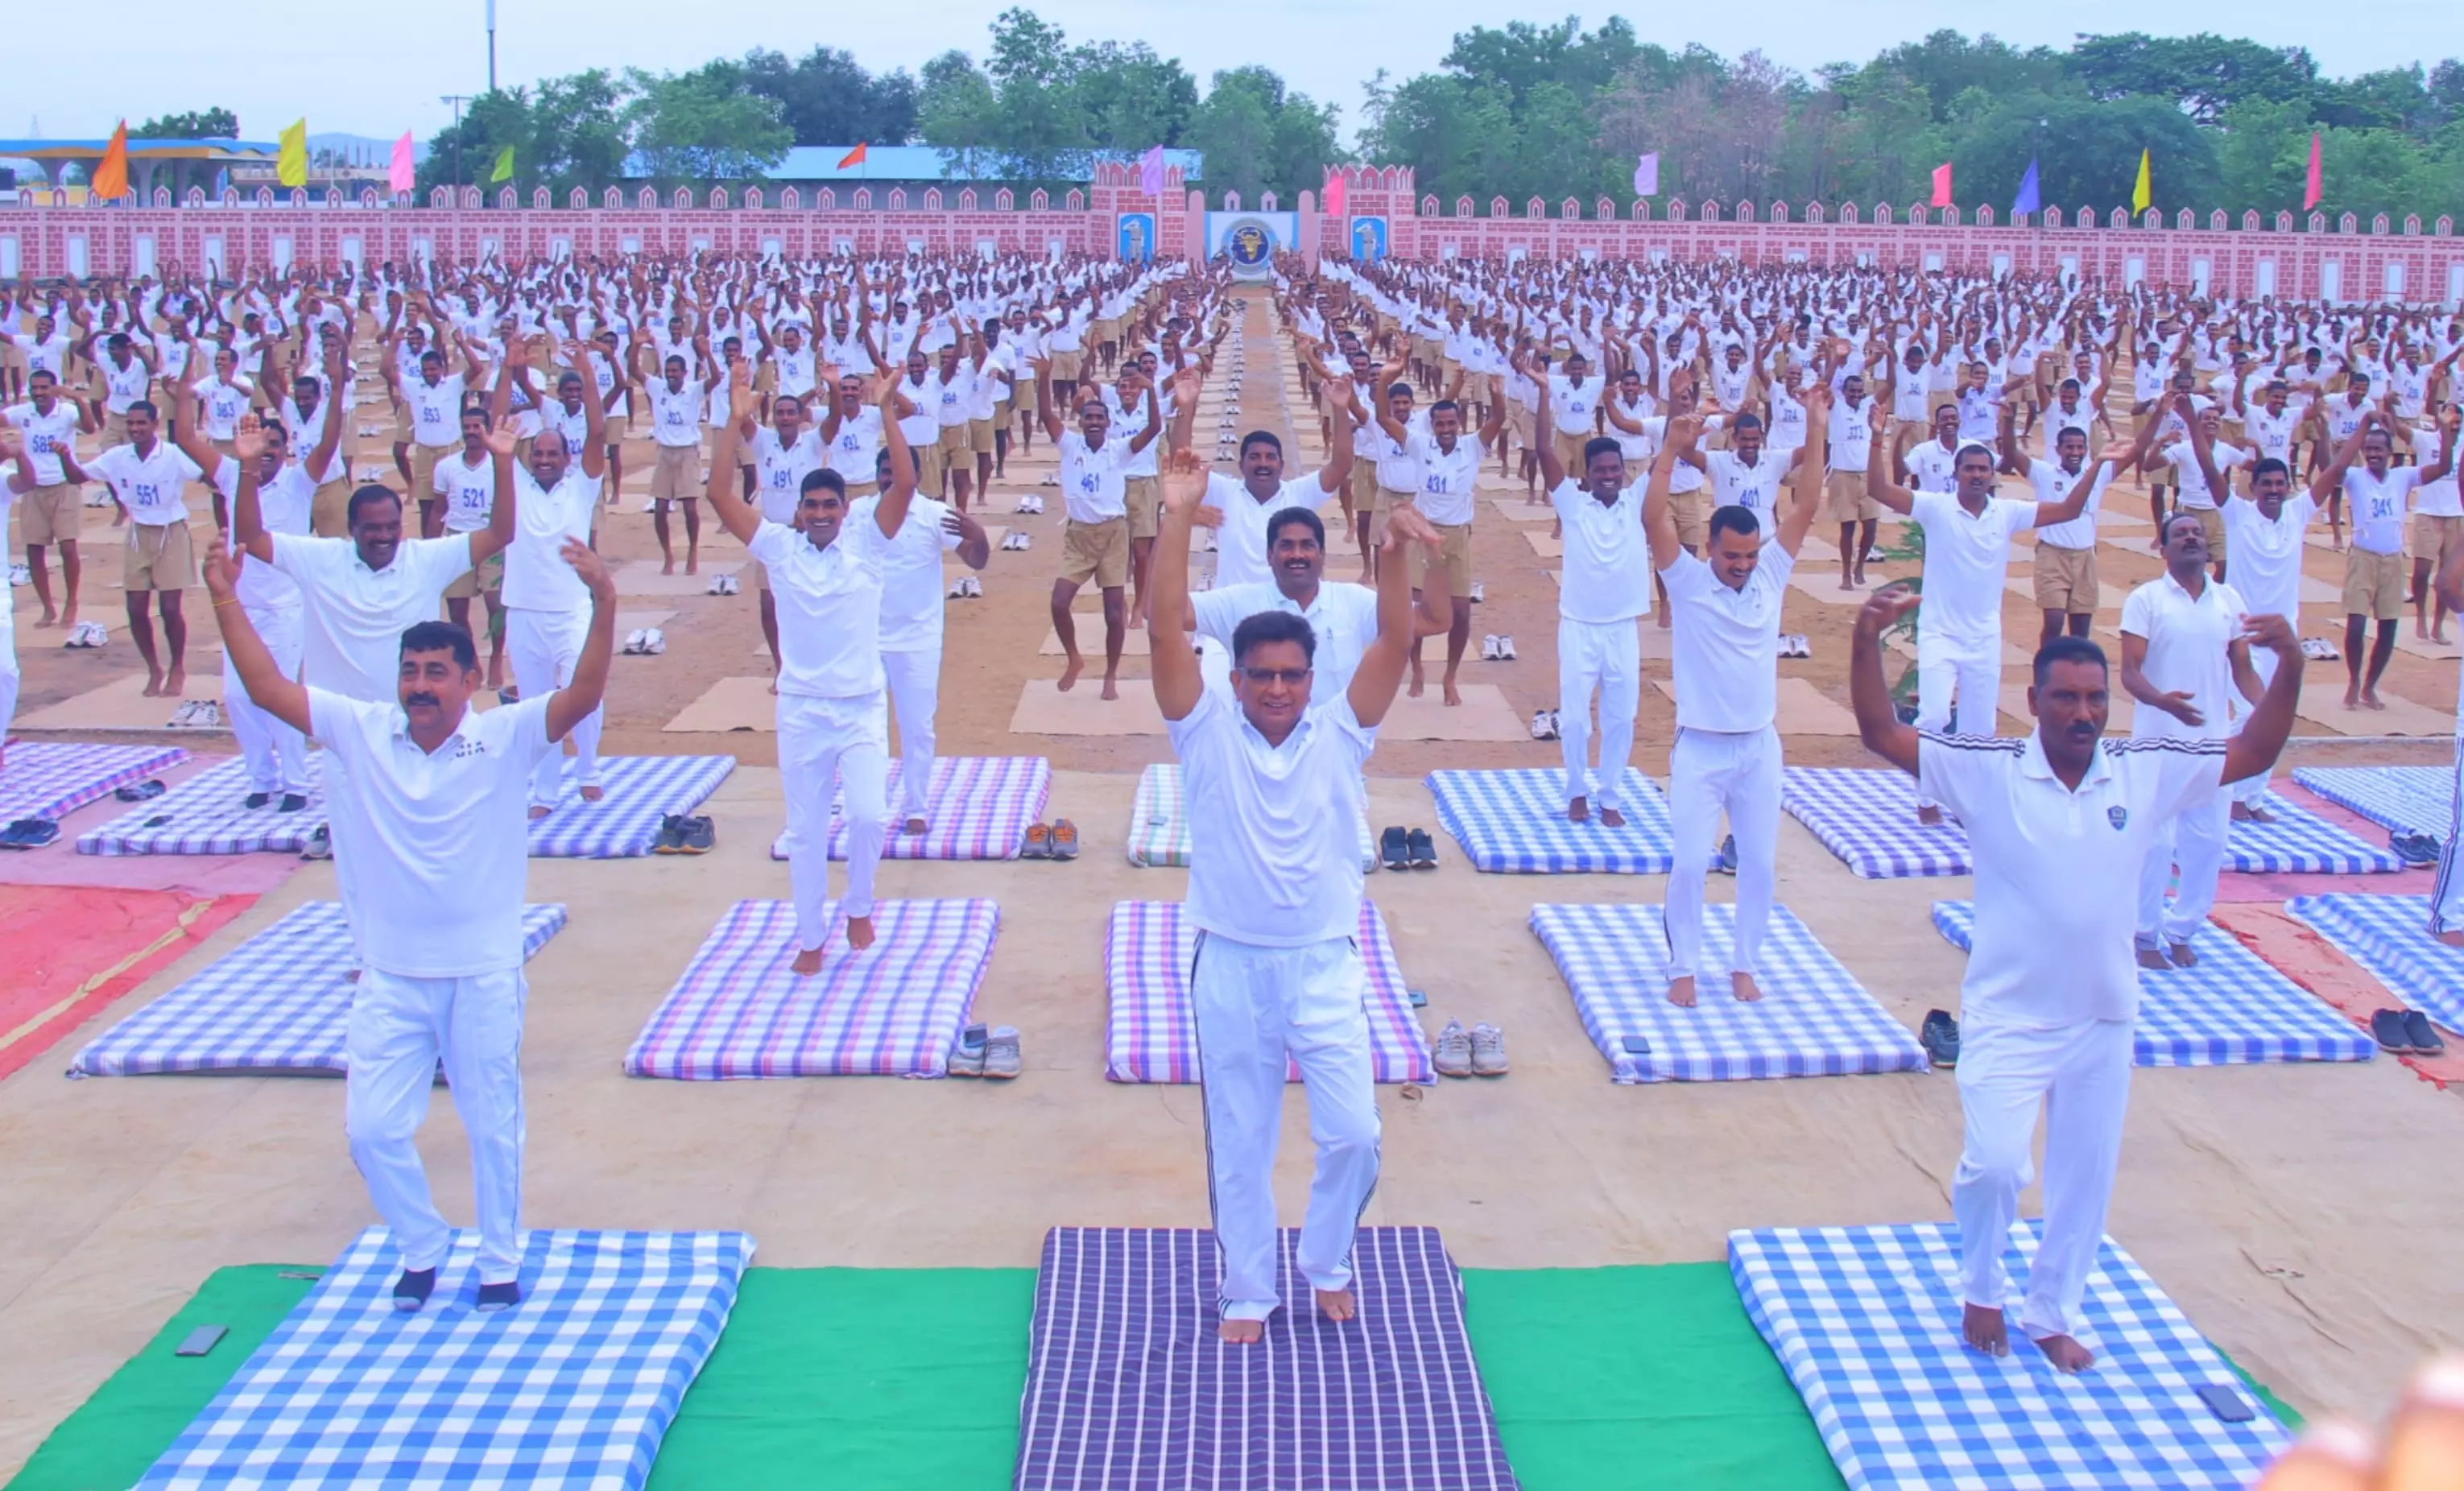 AOL Celebrates Yoga at DGP Office in Hyderabad